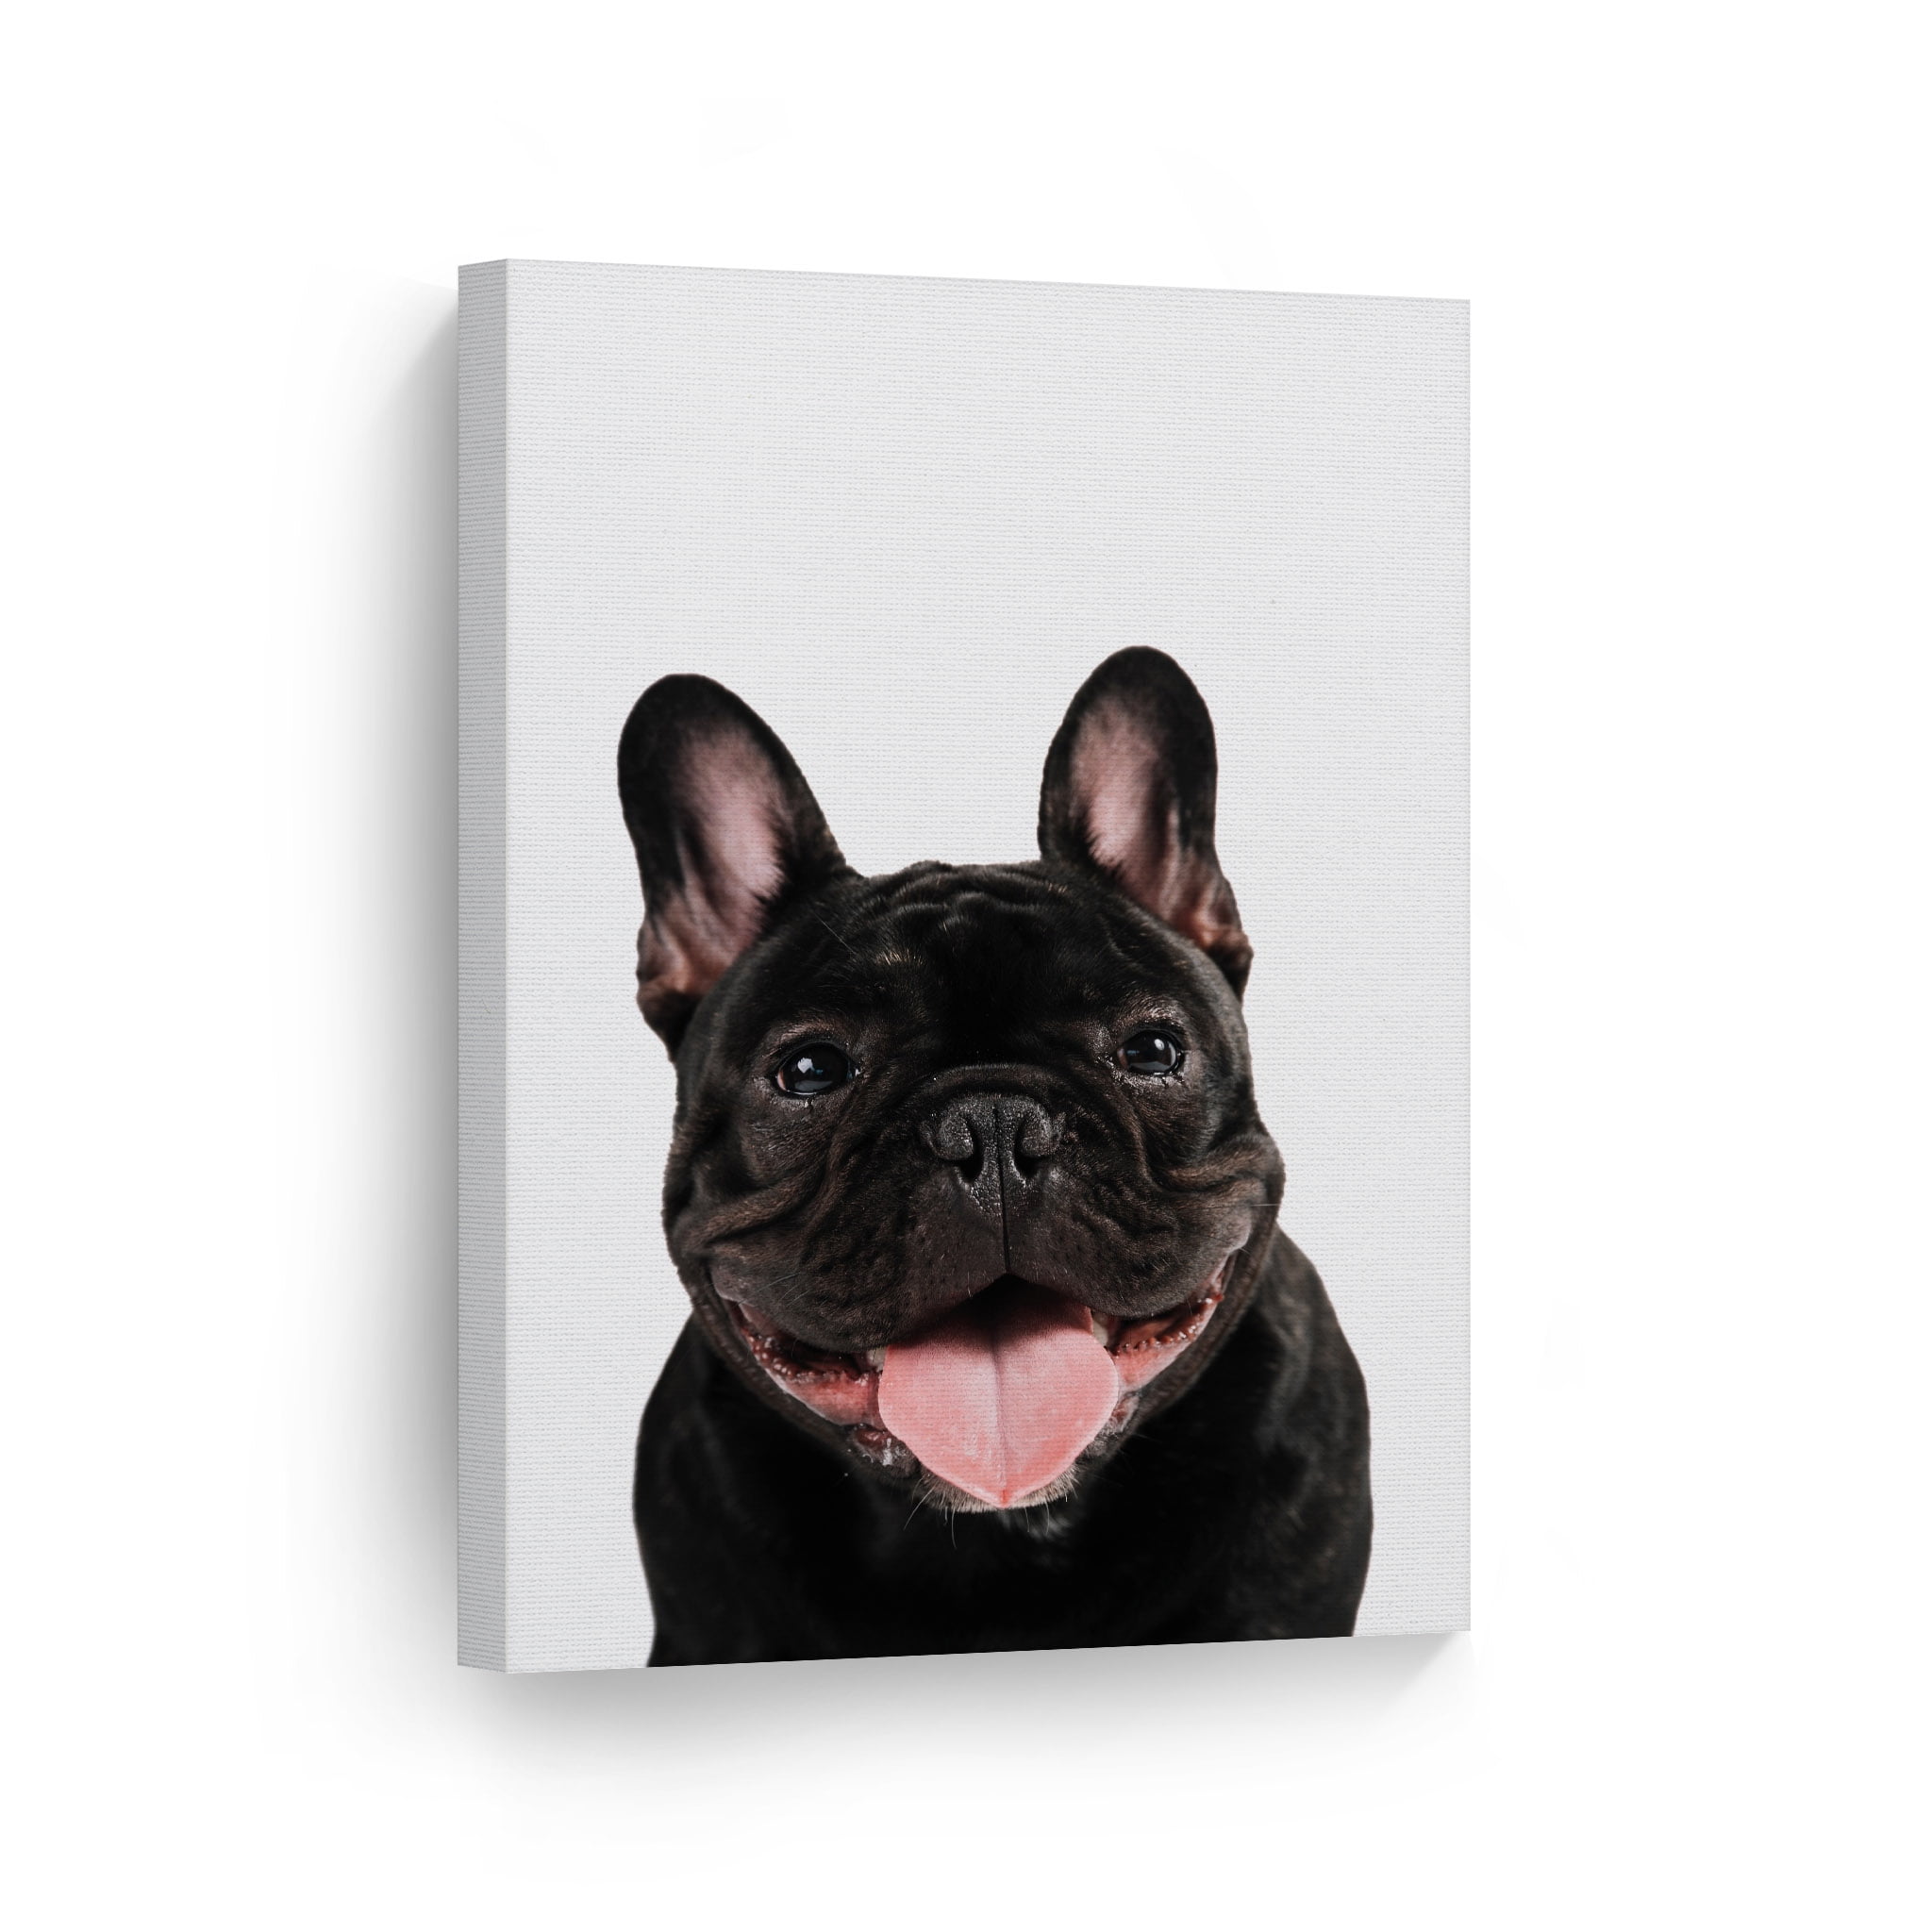 Smile Art Design Portrait Of Cute Black French Bulldog With Tongue Animal Canvas Wall Print Pet Owner Dog Lover Mom Dad Gift Living Room Bedroom Kids Baby Nursery Decor - Black French Bulldog Home Decor